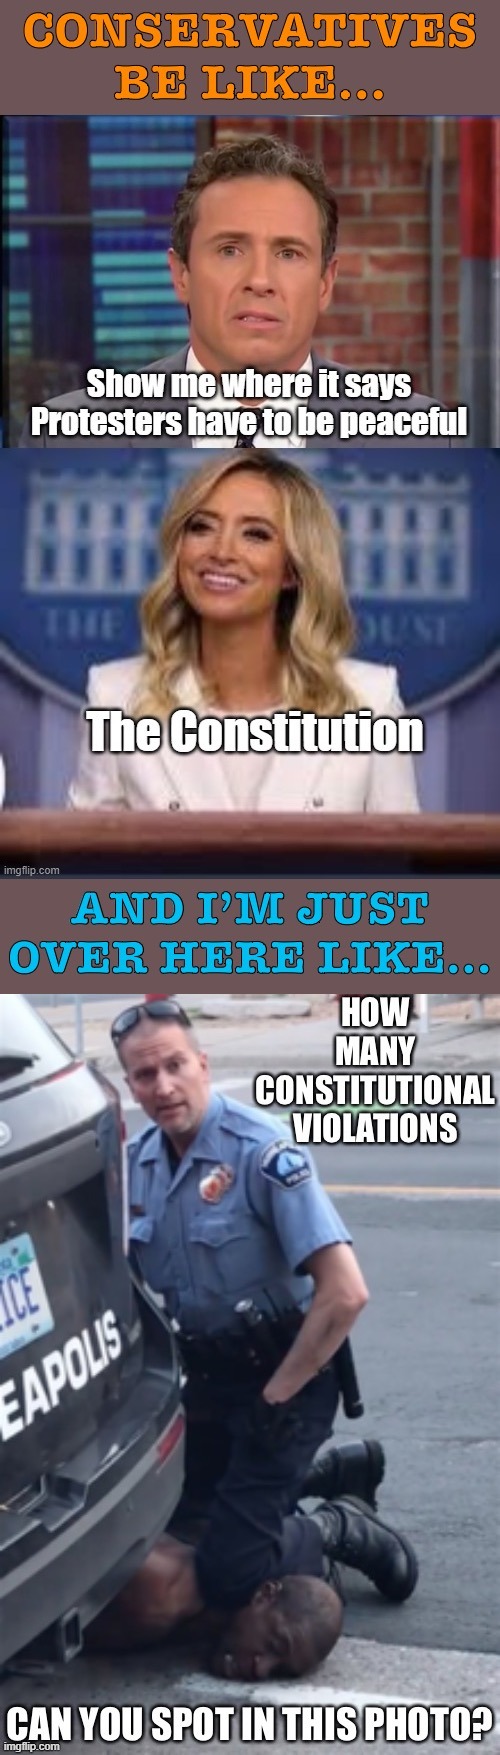 When it comes to police brutality & protests, righties cite the Constitution. I do not think it means what they think it means. | image tagged in the constitution,constitution,conservative logic,george floyd,police brutality,bill of rights | made w/ Imgflip meme maker